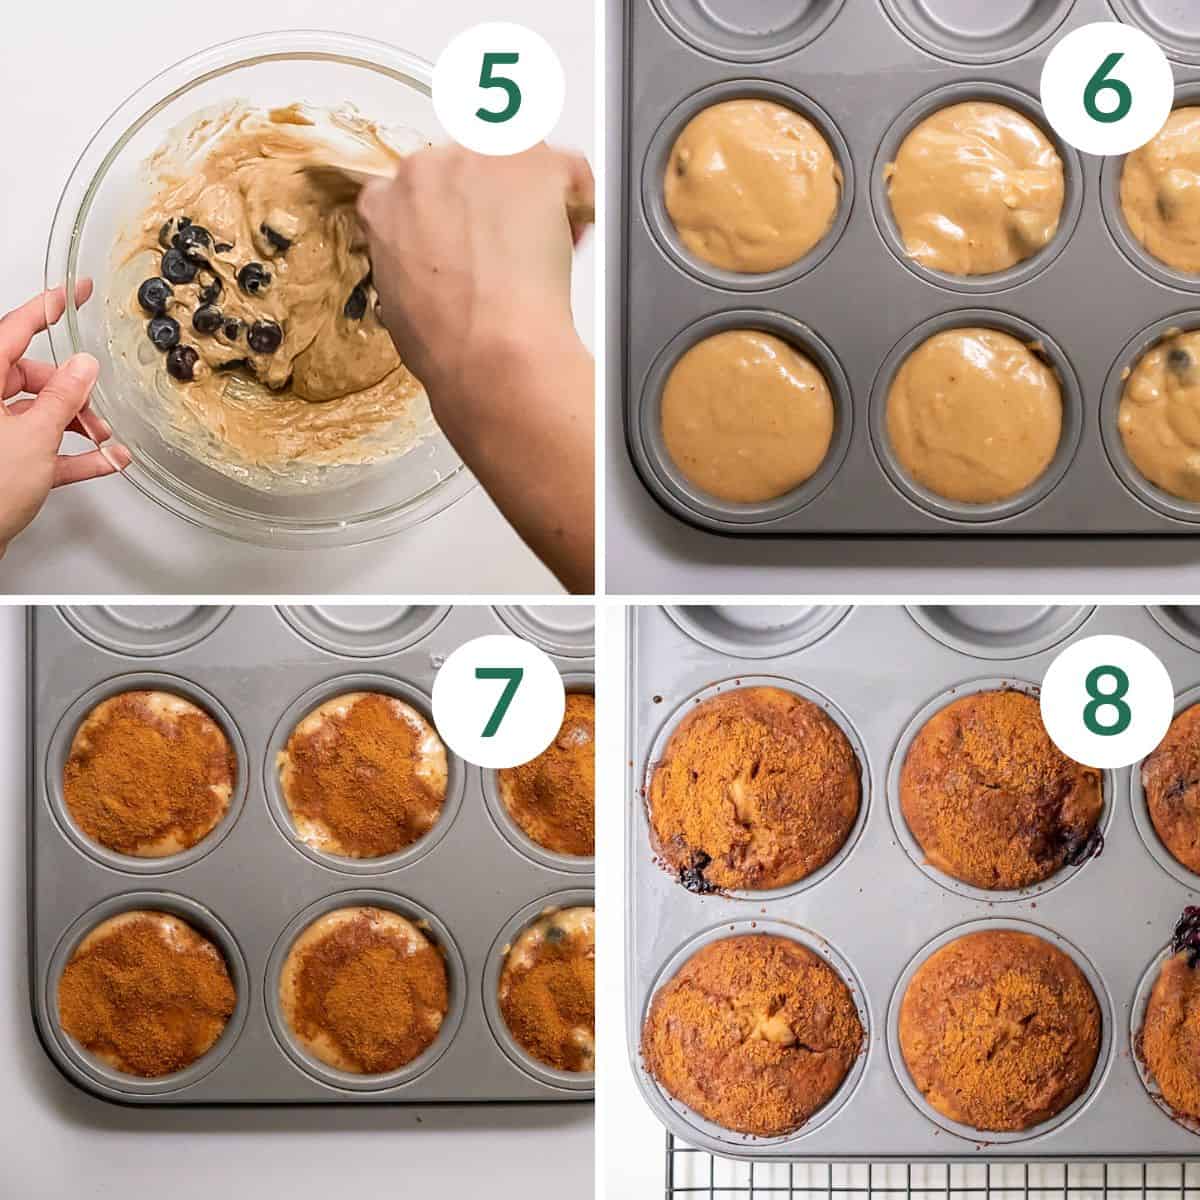 Mixing blueberries in the batter, filling a muffin tin with batter, sprinkling cinnamon sugar on the batter, and the baked muffins.